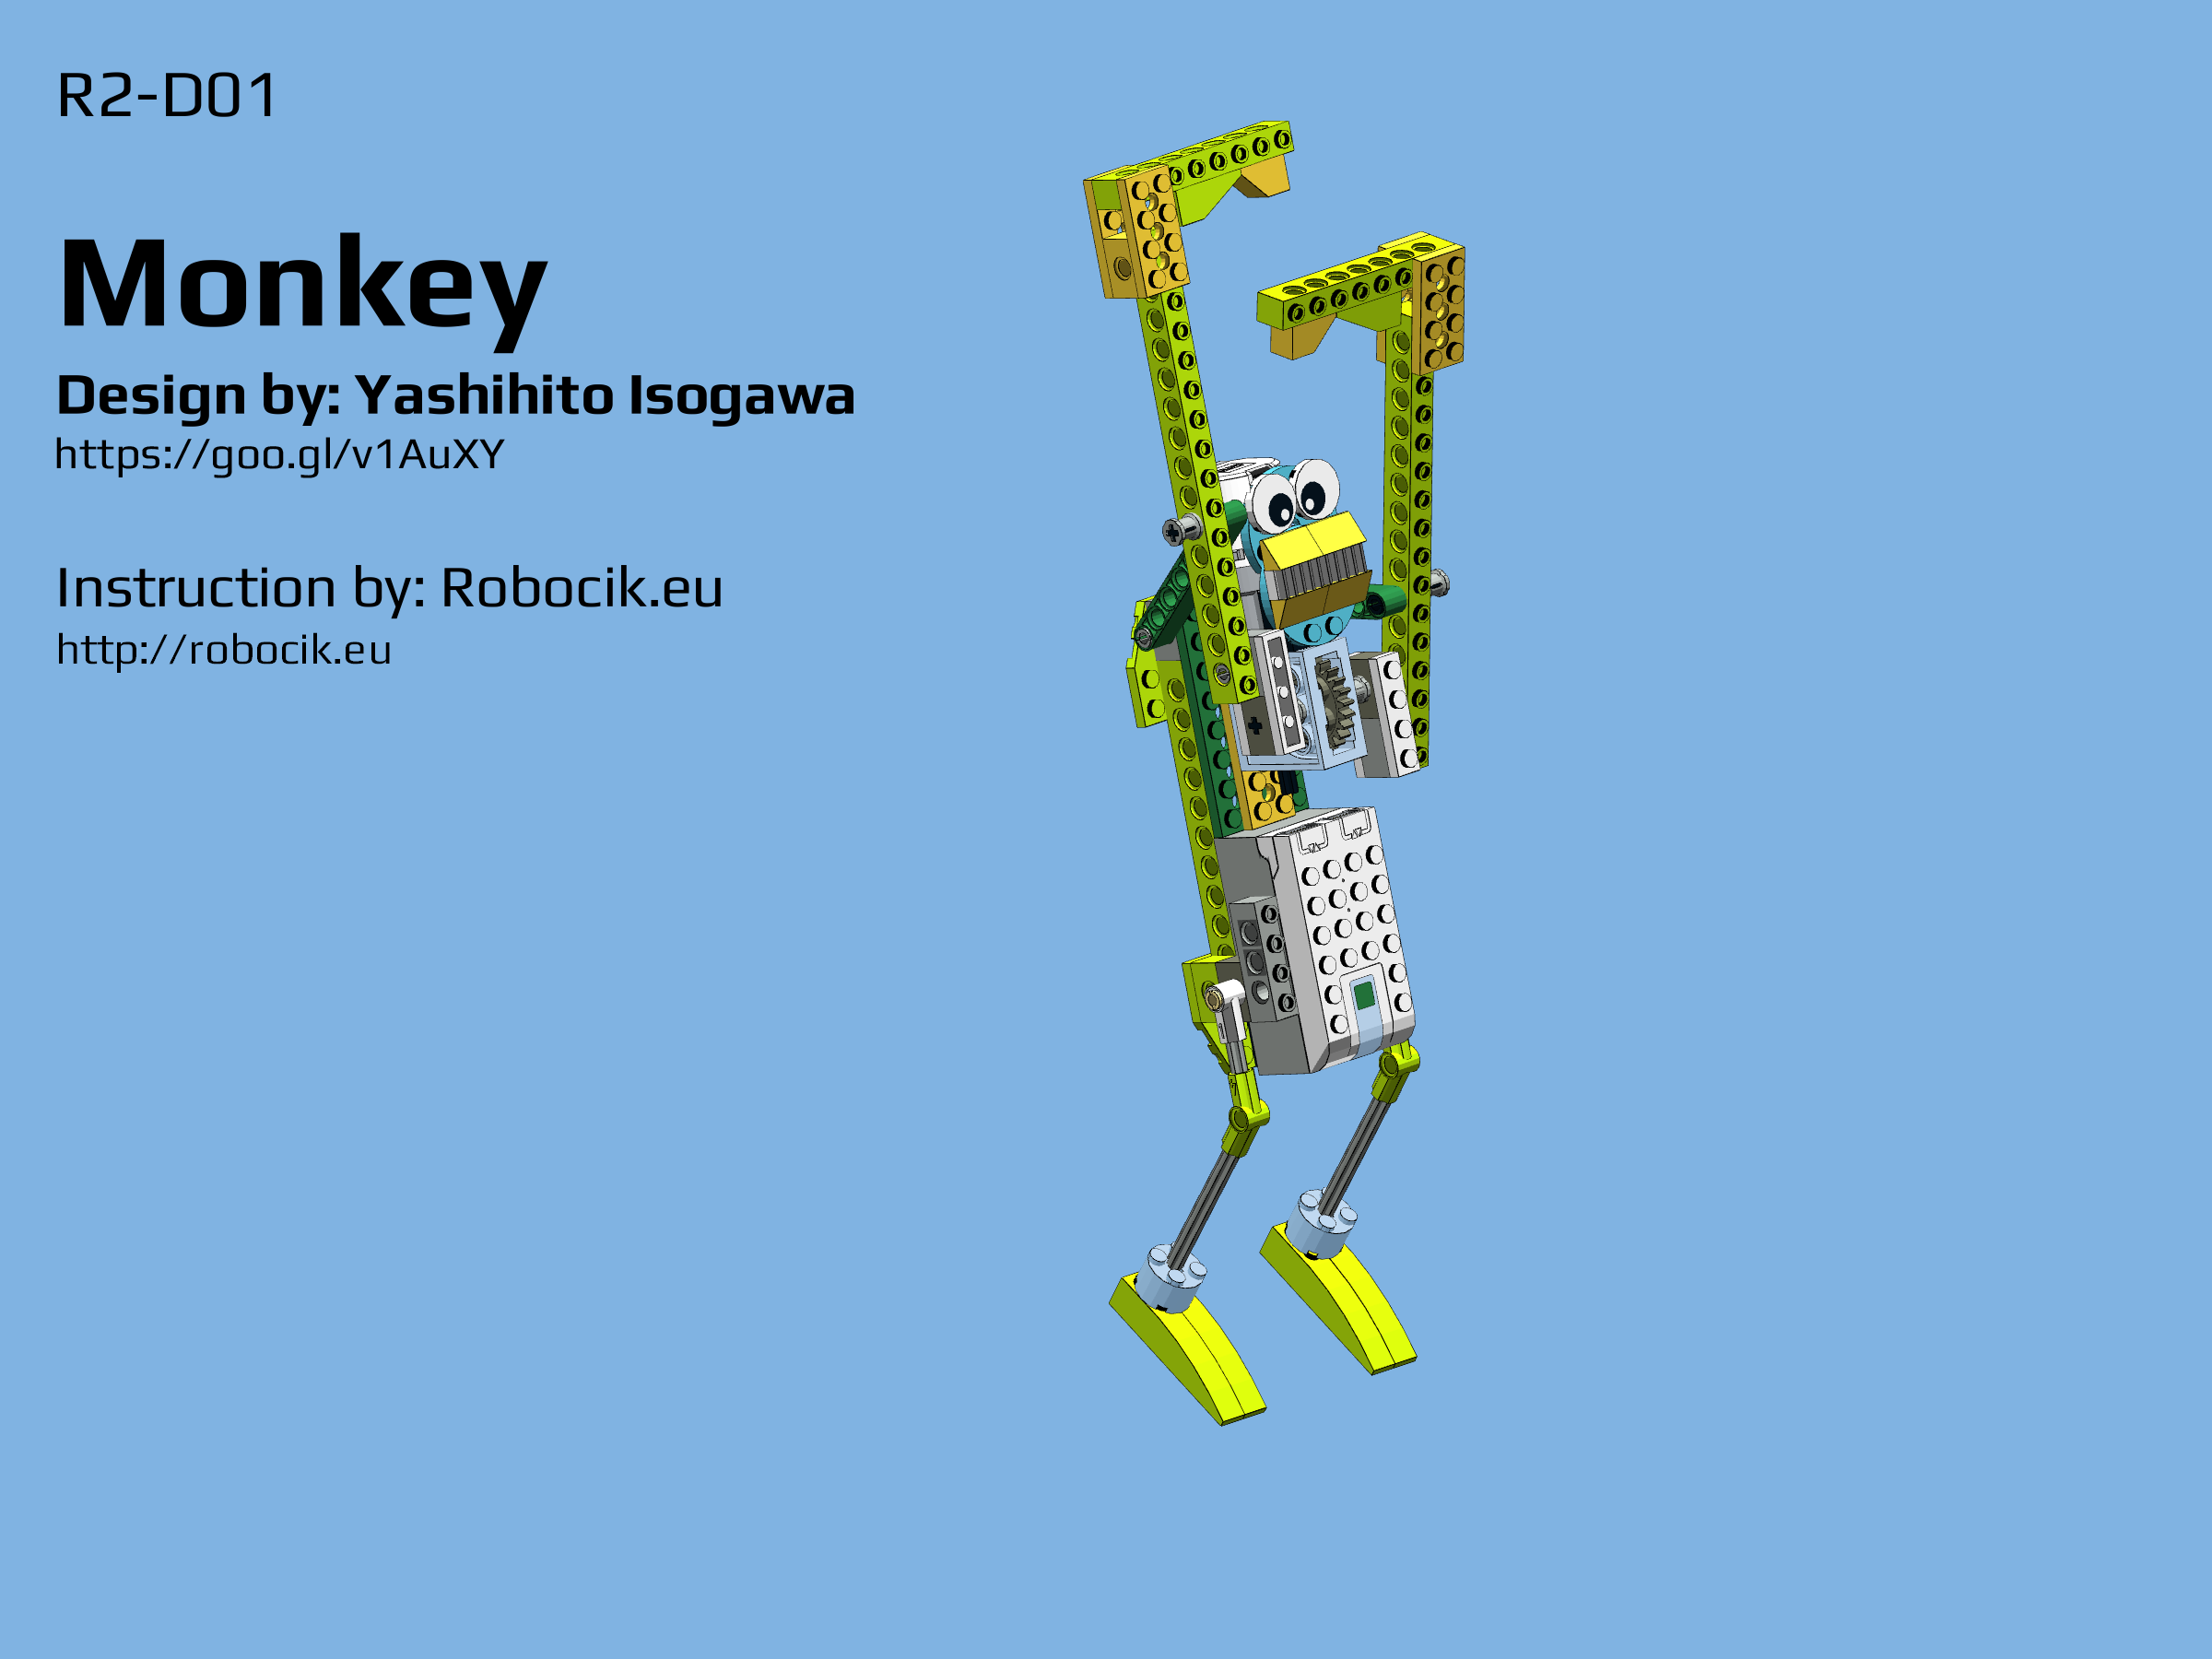 wedobots: WeDo designs for the teacher: Monkey Instructions with 2.0 from Poland!